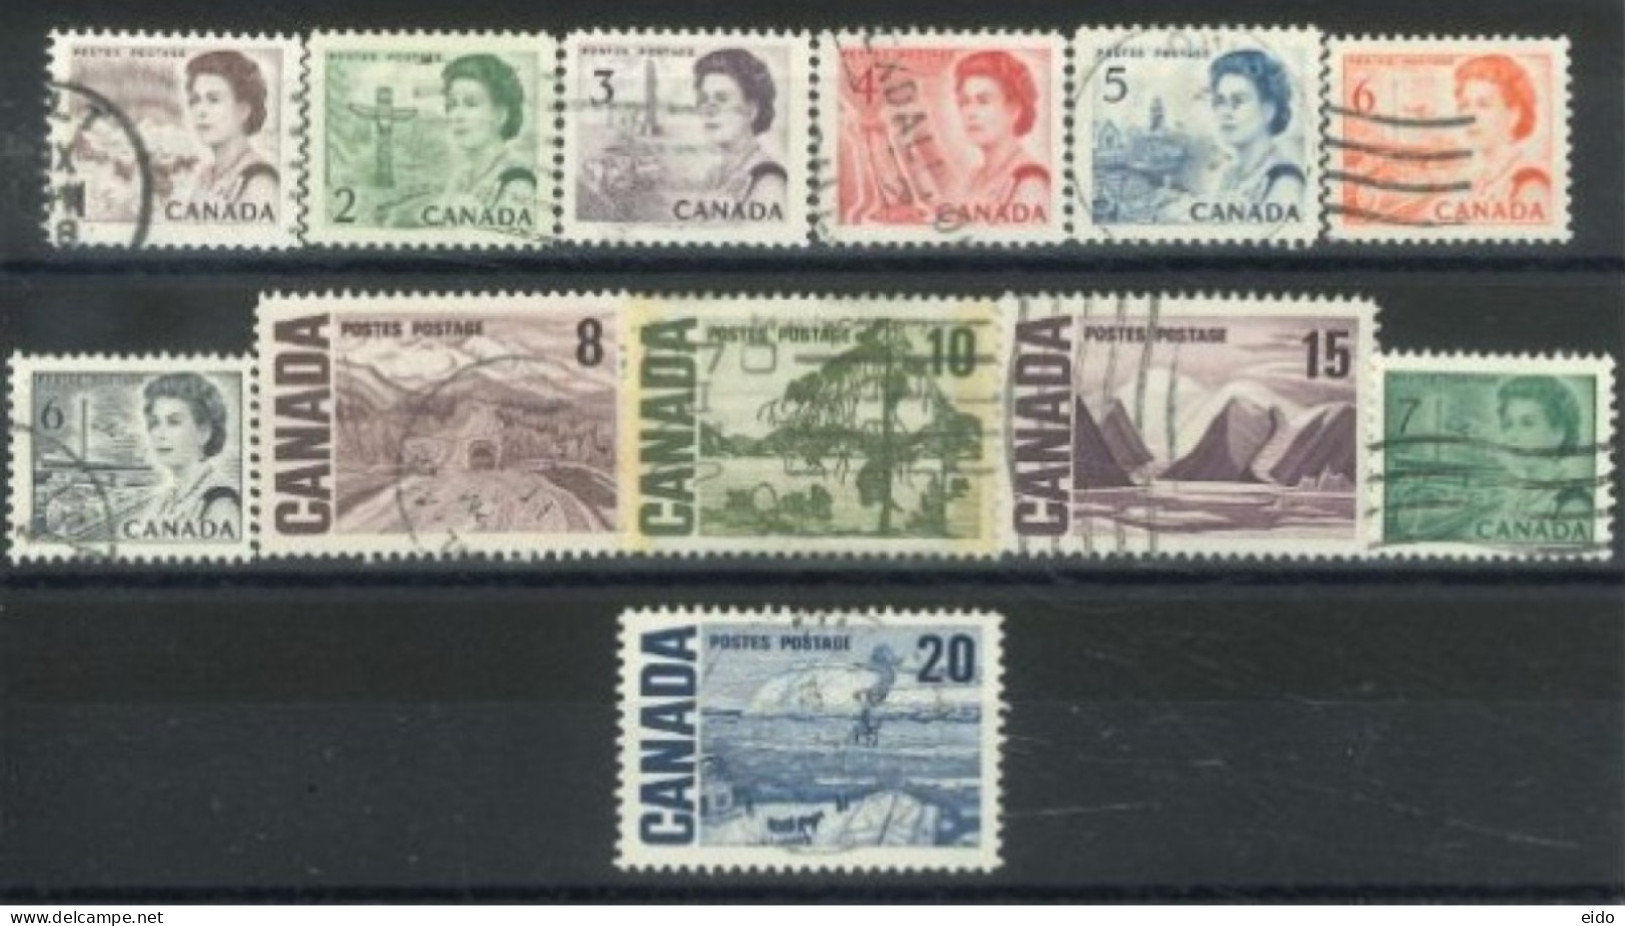 CANADA - 1967, QUEEN ELIZABETH II STAMPS SET OF 12, USED. - Used Stamps